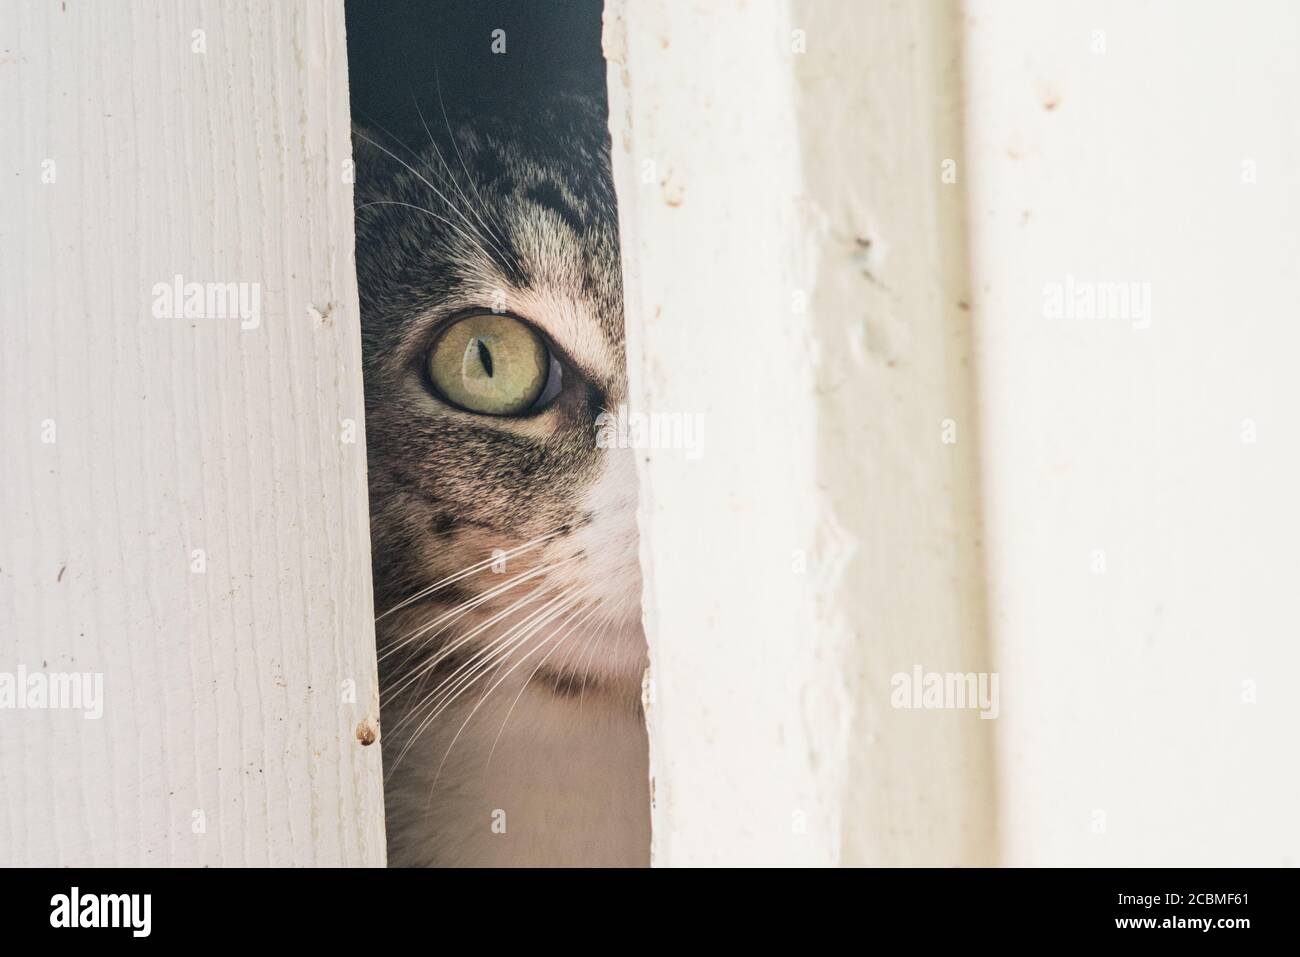 A curious cat peeking through a crack left by a partially open door. The indoor cat curiously watches the outdoors. Stock Photo